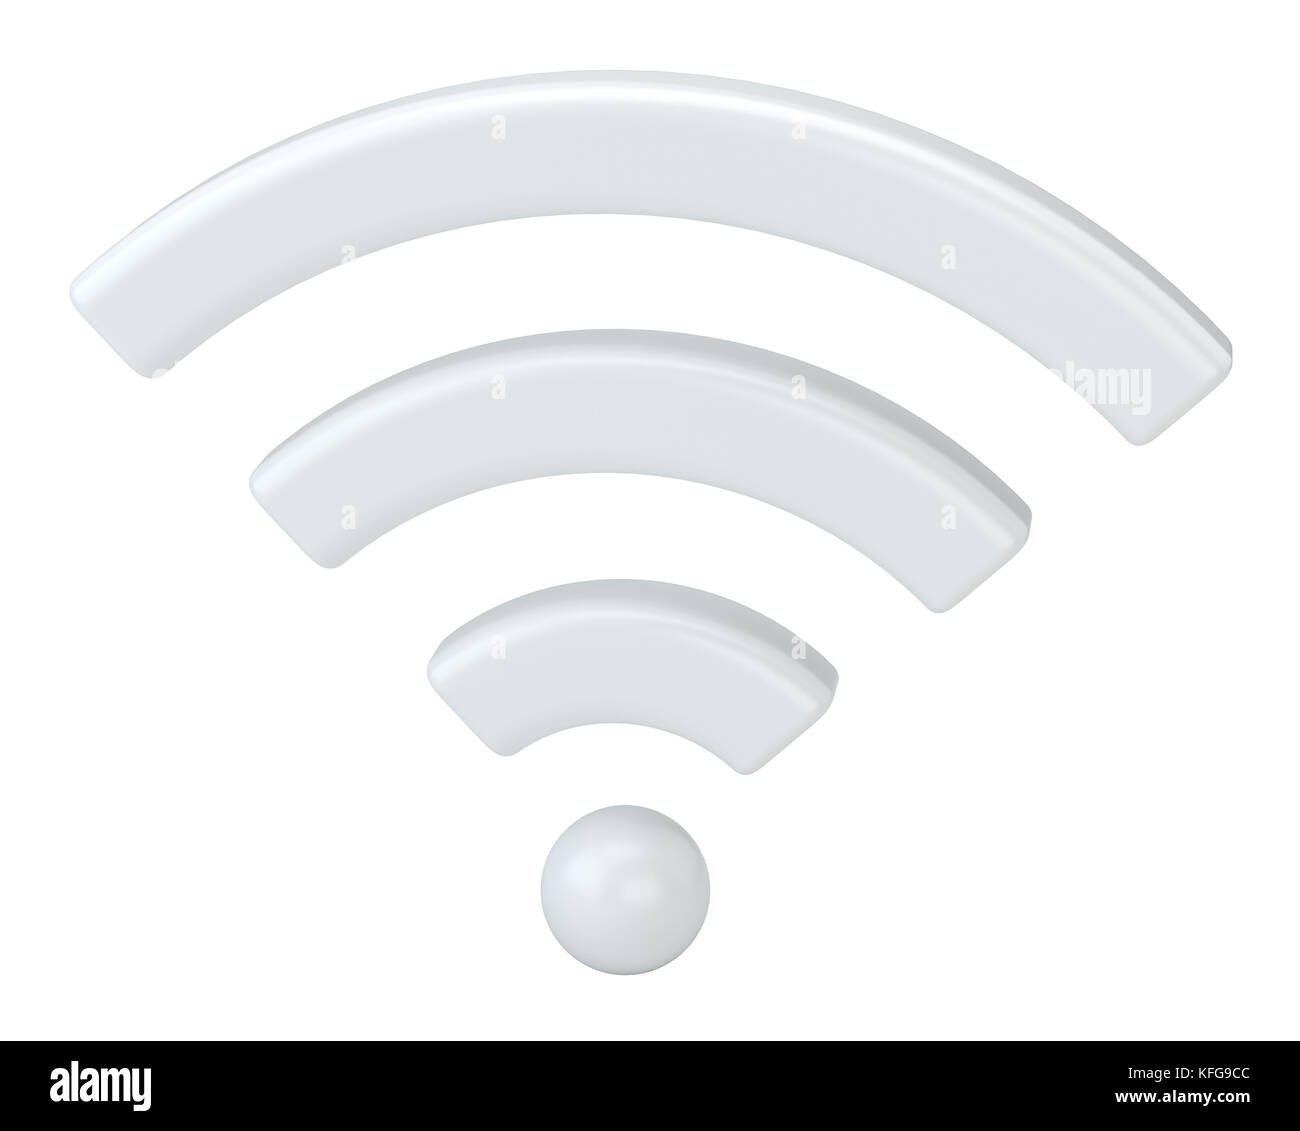 Wi Fi Wireless Network Symbol, 3d rendering Isolated on white background. Stock Photo